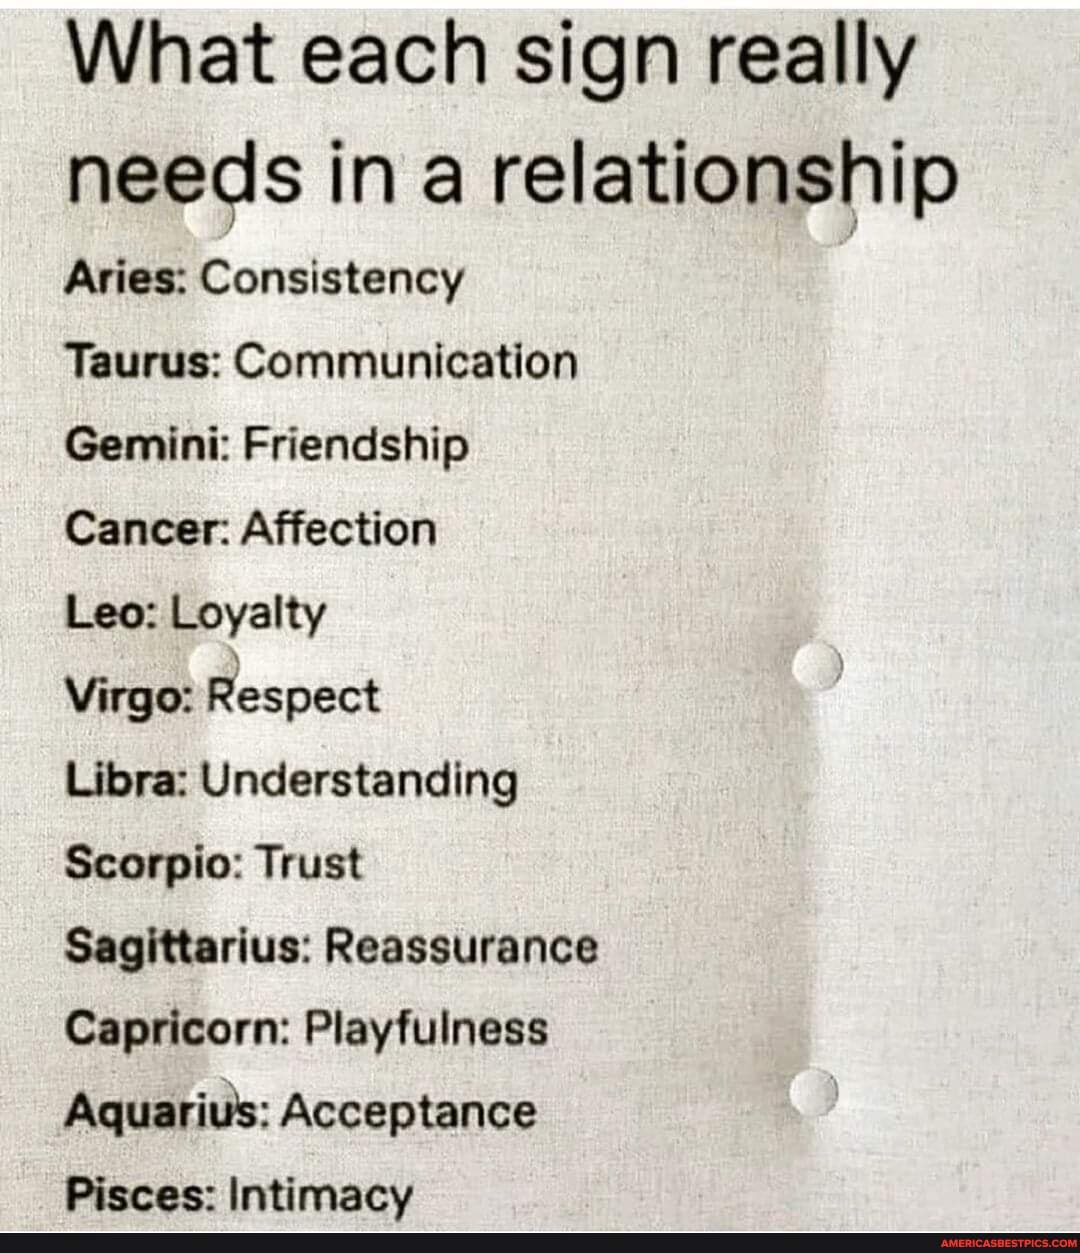 What gemini needs in a relationship?